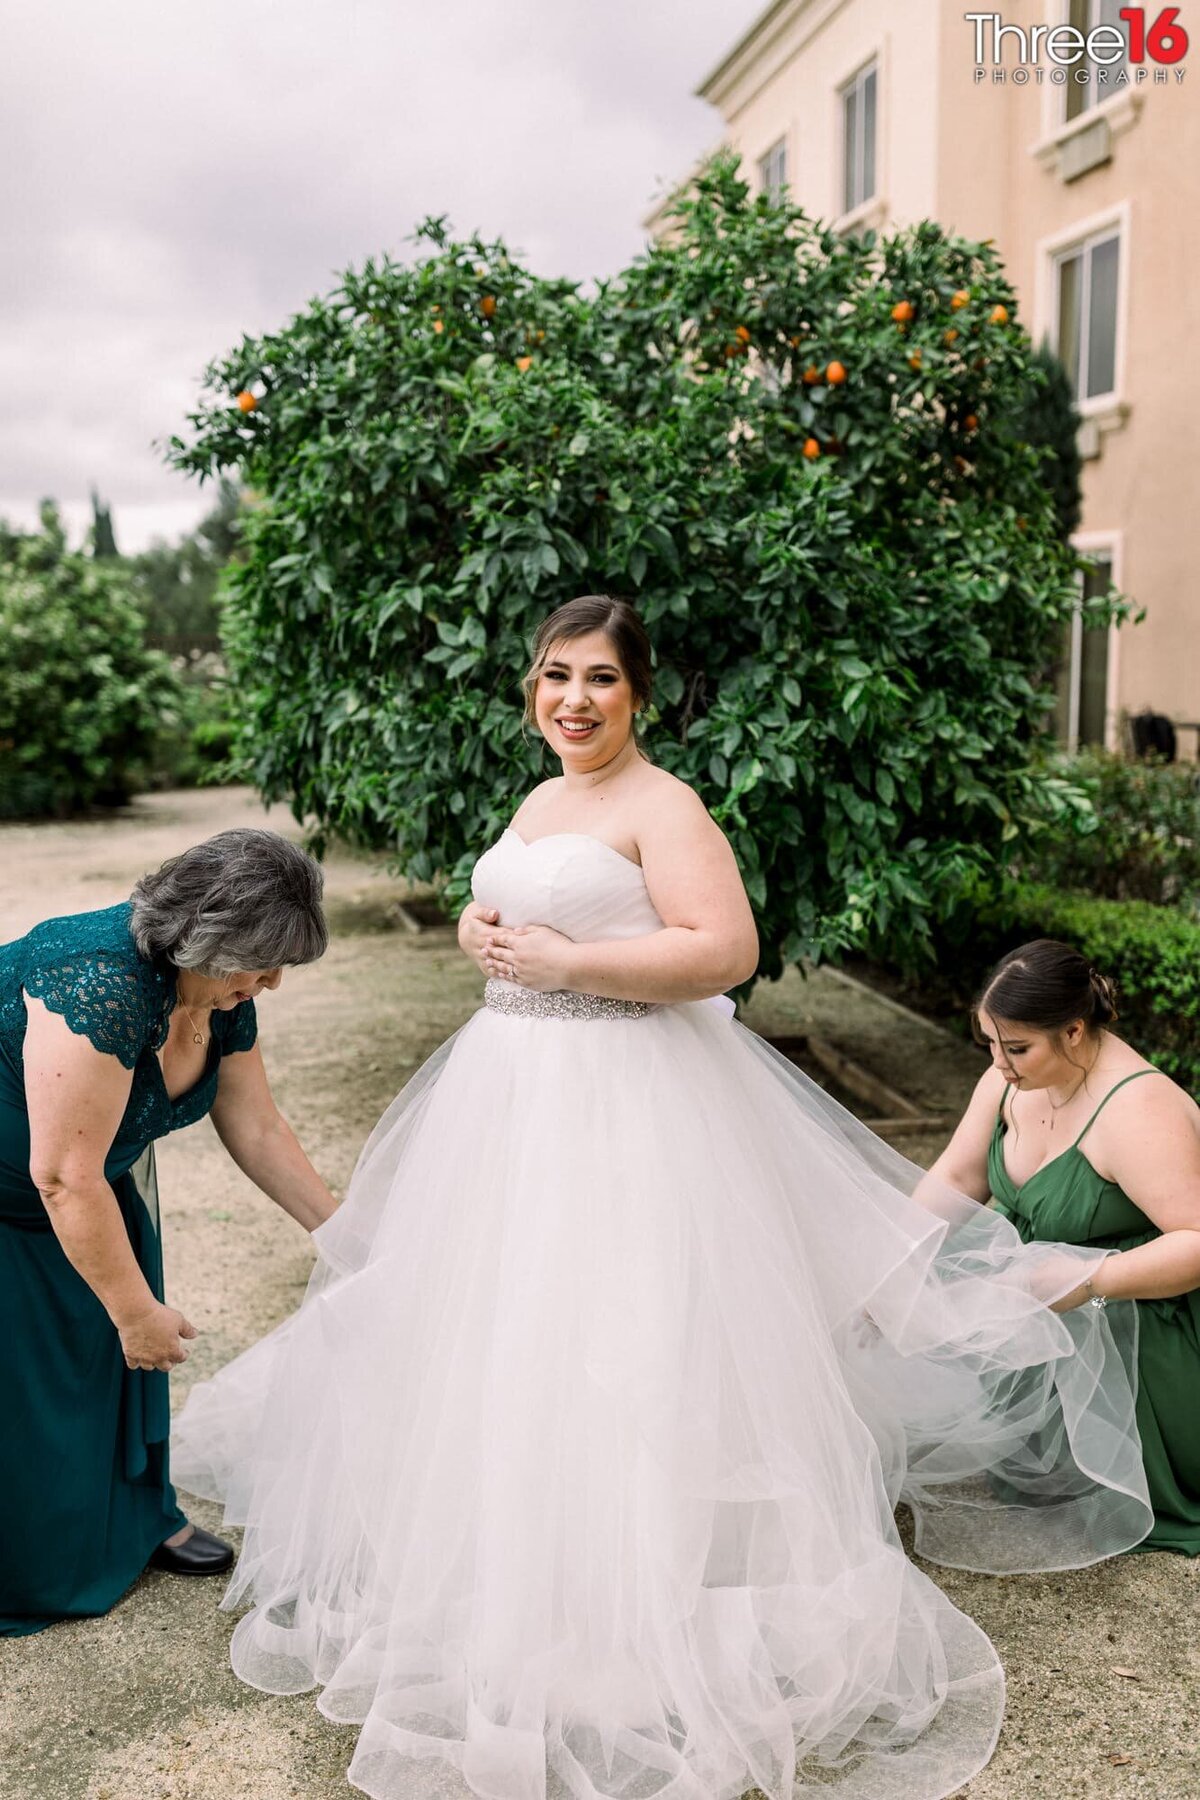 Bride having her dress train fanned out by her mother and bridesmaid before photos